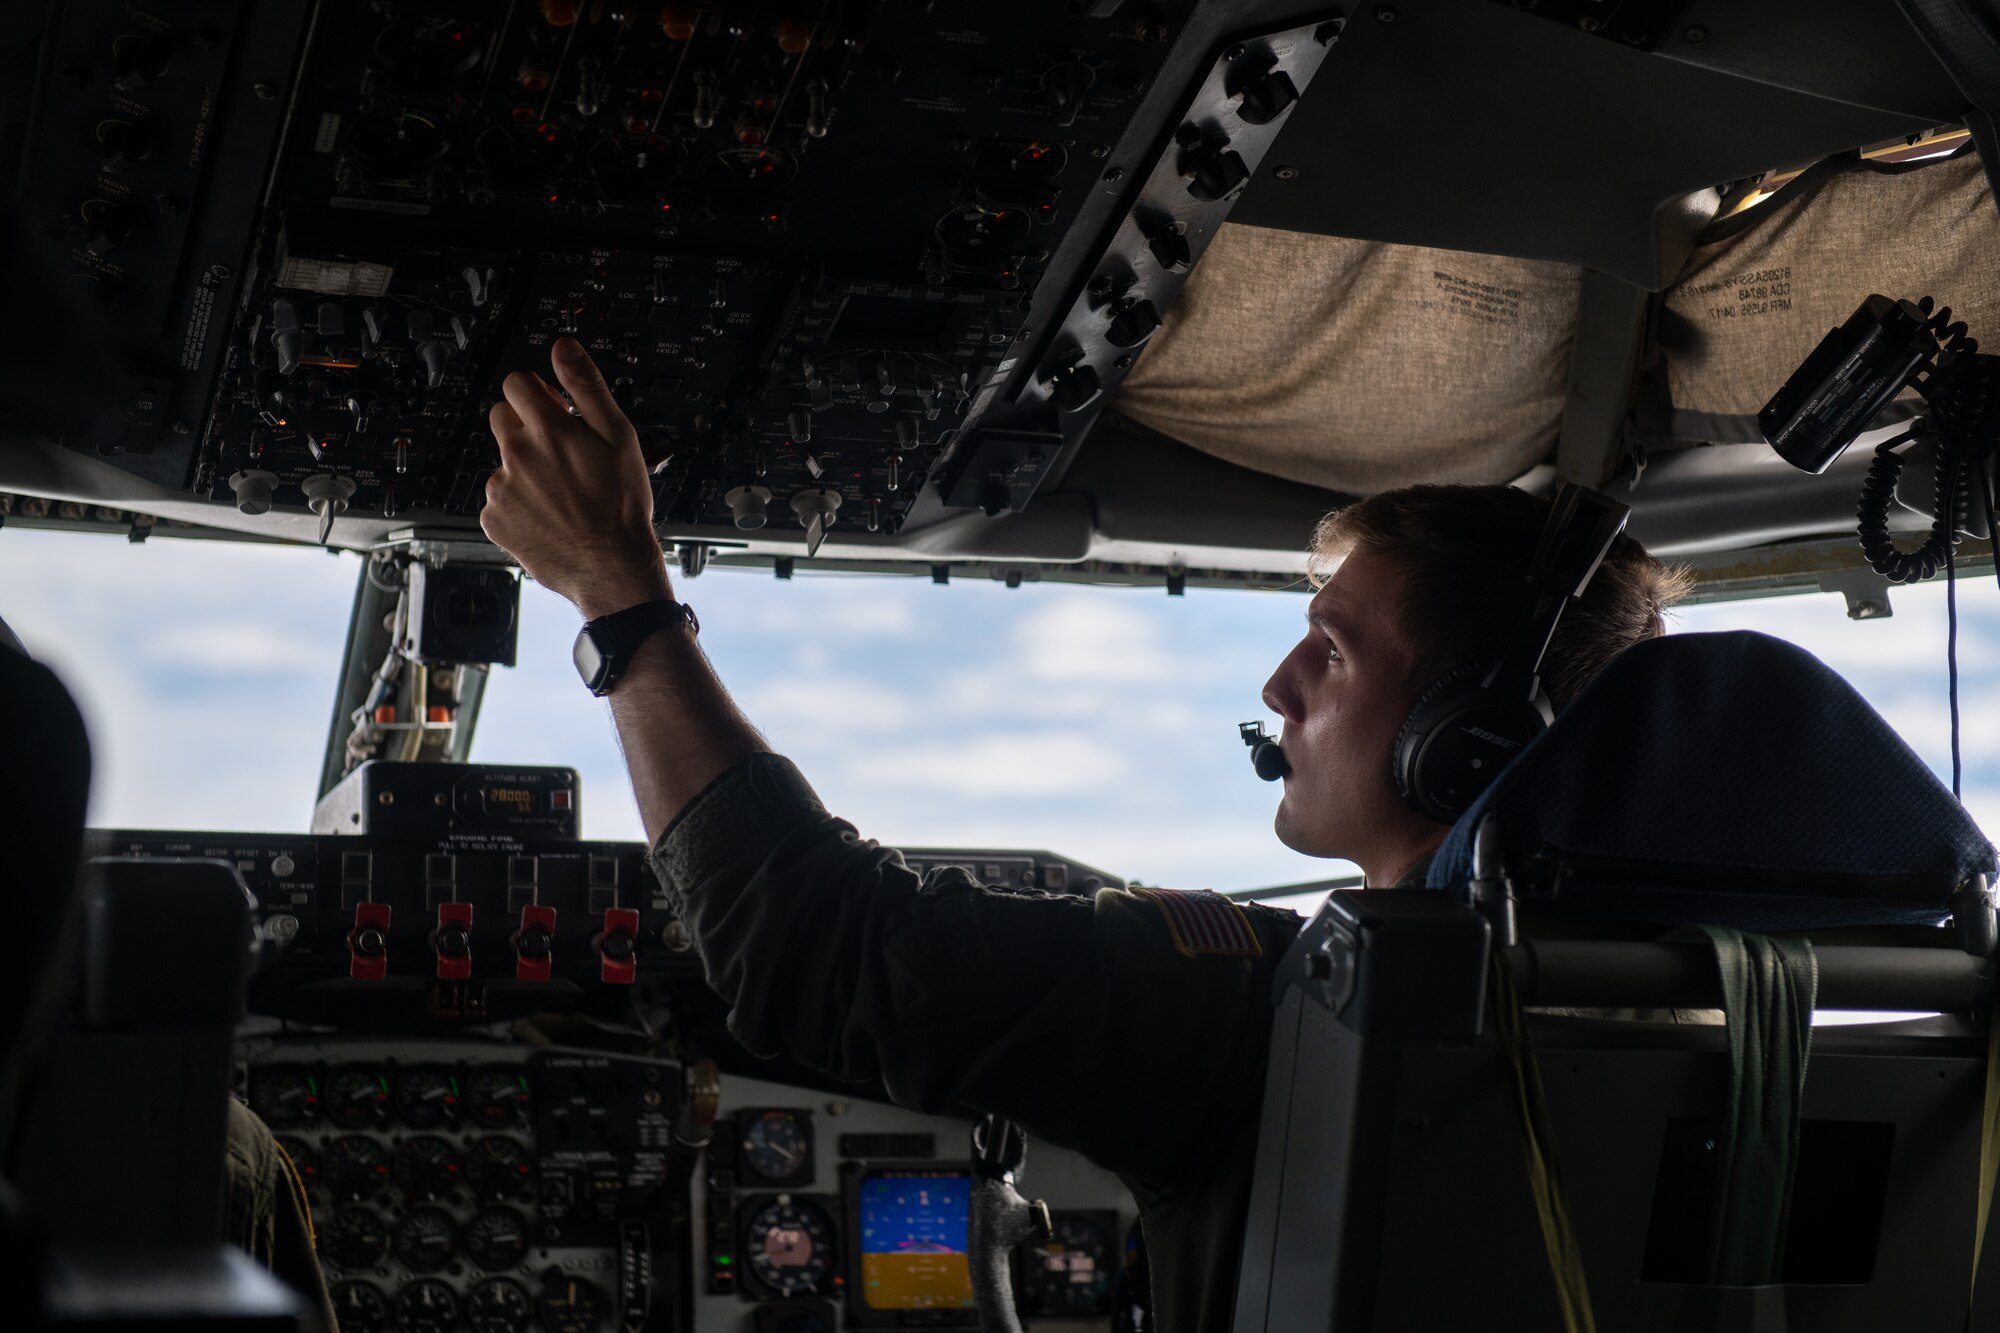 U.S. Air Force Capt. Dan Thomas, 909th Aerial Refueling Squadron KC-135 Stratotanker pilot, conducts aerial refueling operations in support of a Bomber Task Force mission, Nov. 13, 2020, over the Pacific Ocean off the coast of Japan. Bomber Task Force missions demonstrate U.S. commitment to allies and partners throughout the Indo-Pacific area of responsibility and the ability of Air Force Global Strike Command to deliver lethal strike options for combatant commanders at a moment’s notice. (U.S. Air Force photo by Staff Sgt. Peter Reft)